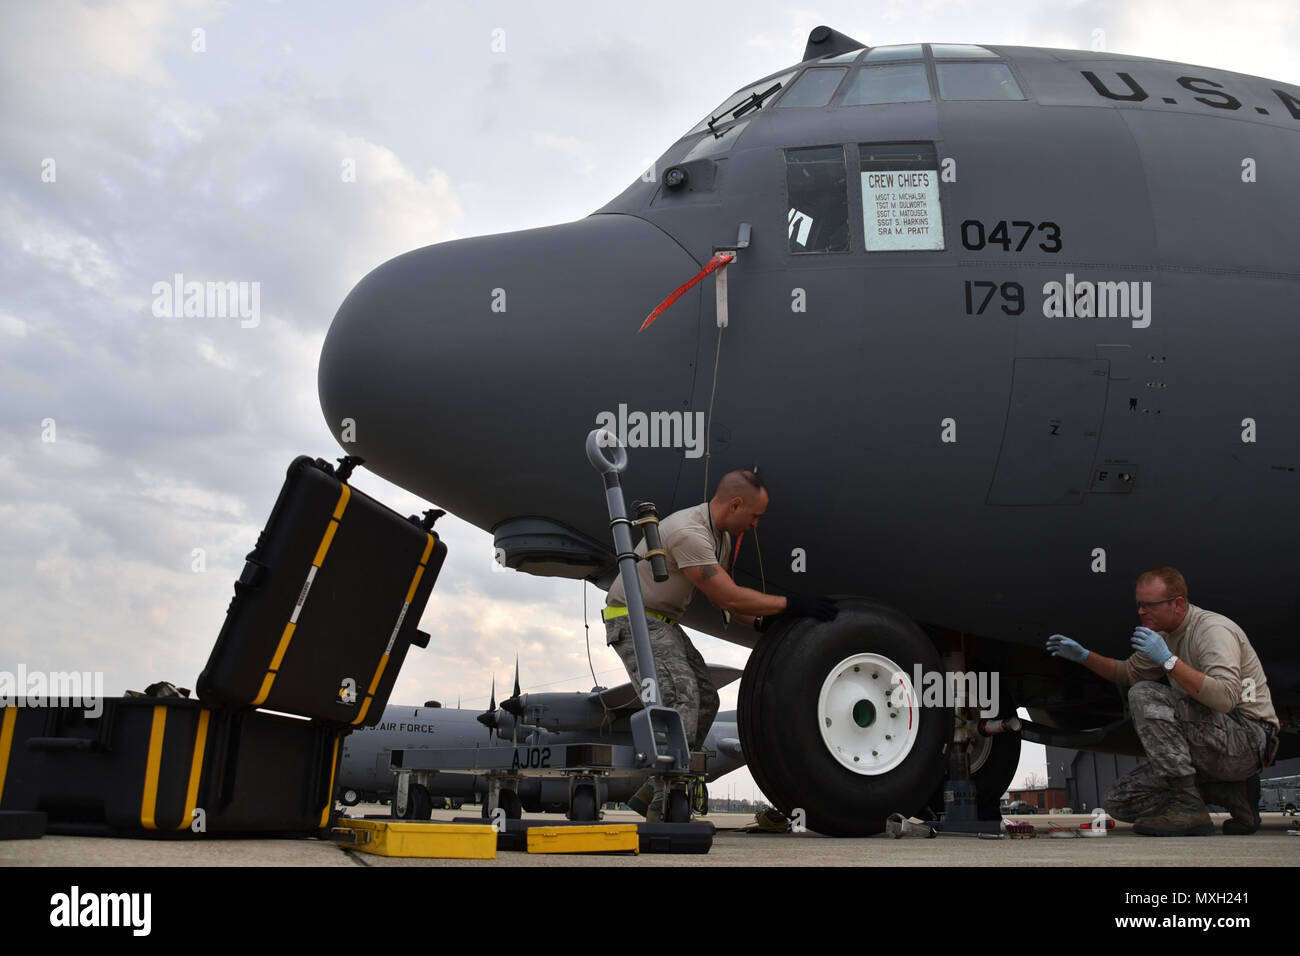 Master Sgt. Zac Michalski and Tech. Sgt. Mark Dulworth change a tire of a C-130H Hercules on the flightline Nov. 2, 2016, at the 179th Airlift Wing, Mansfield, Ohio. The Ohio Air National Guard unit is always on mission to respond with highly qualified citizen airmen to execute Federal, State and community missions. (U.S. Air National Guard photo by Airman Megan ShepherdReleased) Stock Photo